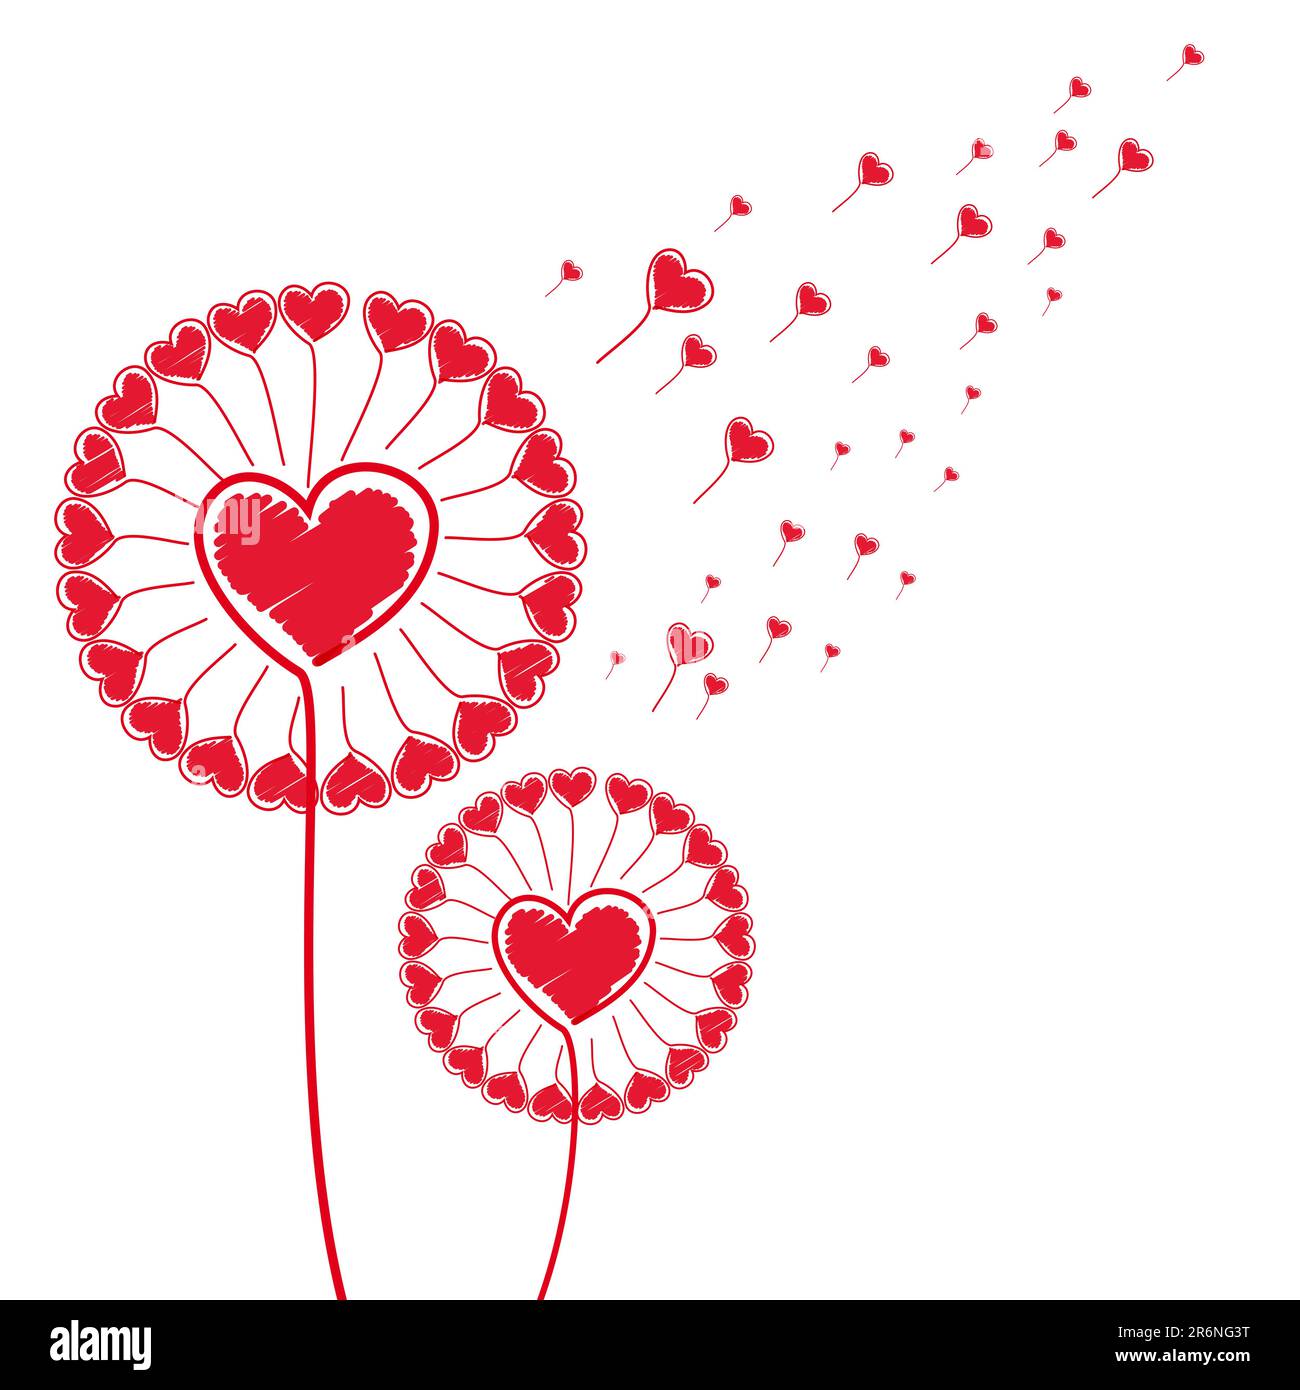 Eps Couple of dandelions Illustration for your design. Stock Vector